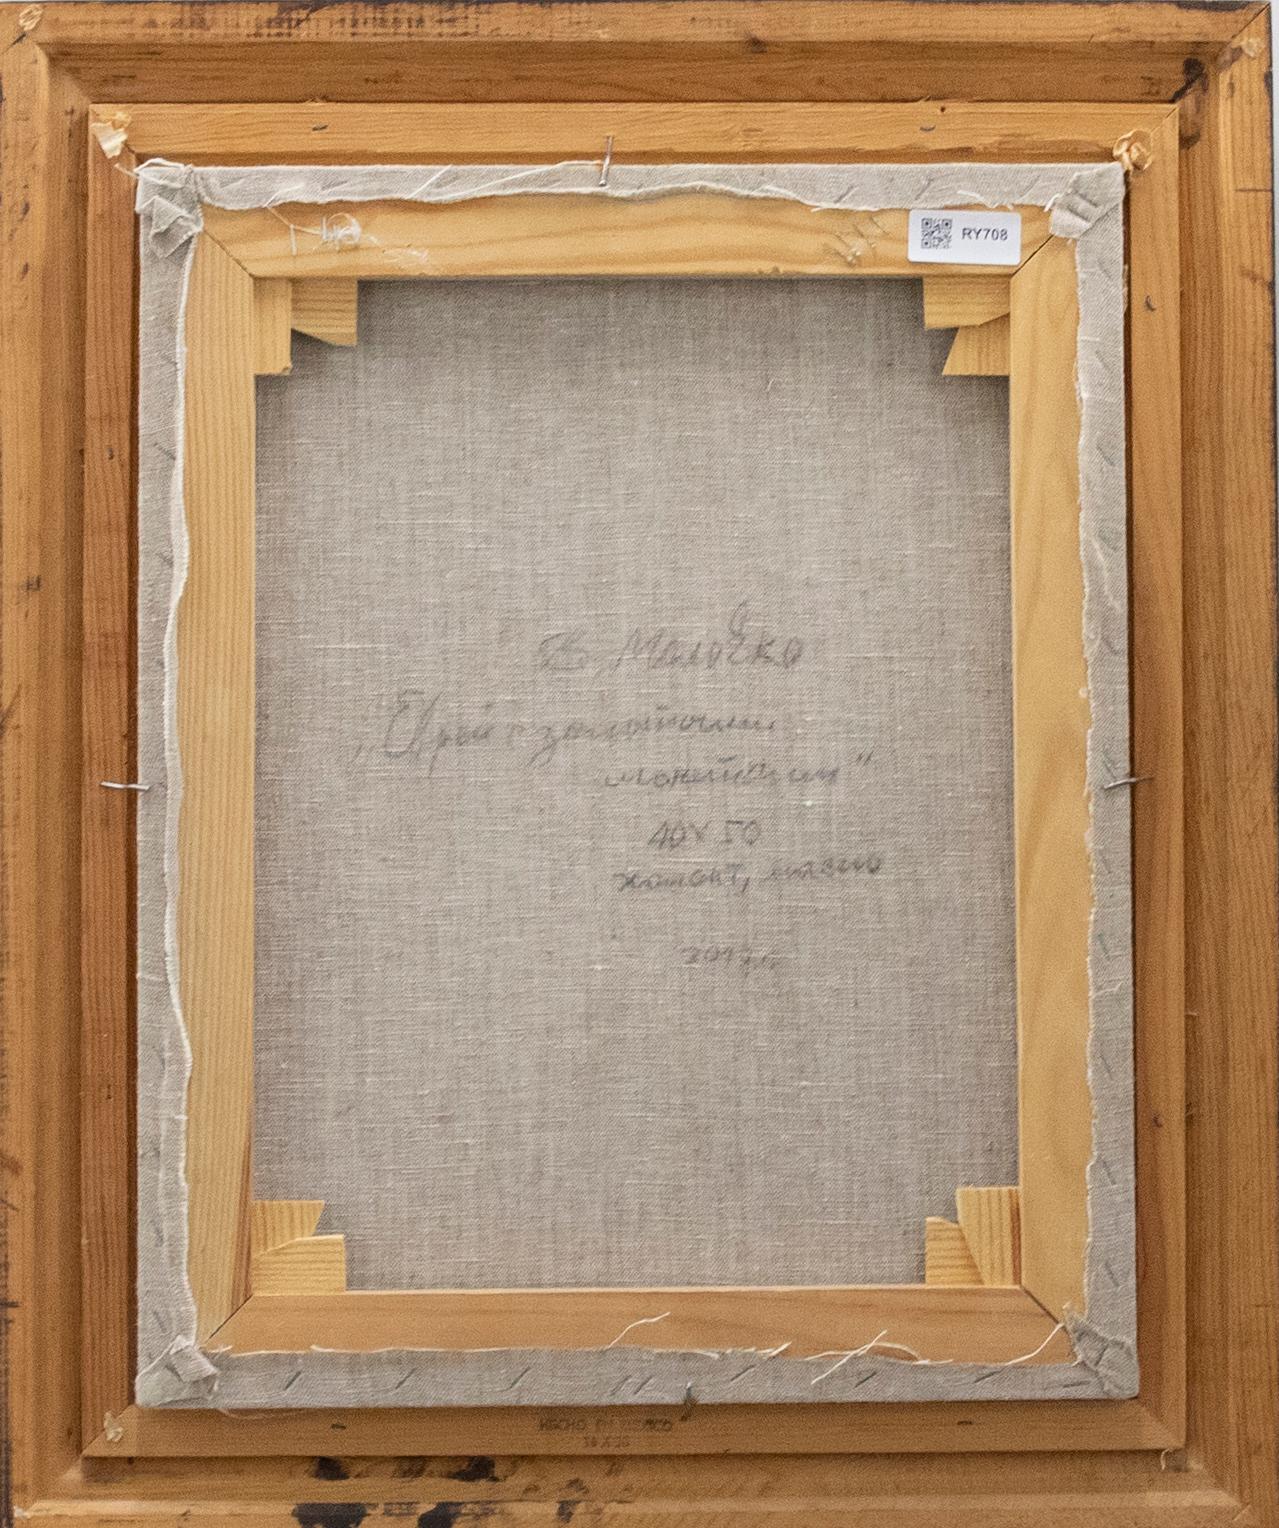 An accomplished oil portrait of an elderly rabbi counting coin in his study. Illegibly signed and dated (2017) to the lower right. Presented in a handsome wood frame with linen slip. Inscribed in Cyrillic to the reverse. On canvas on stretchers.